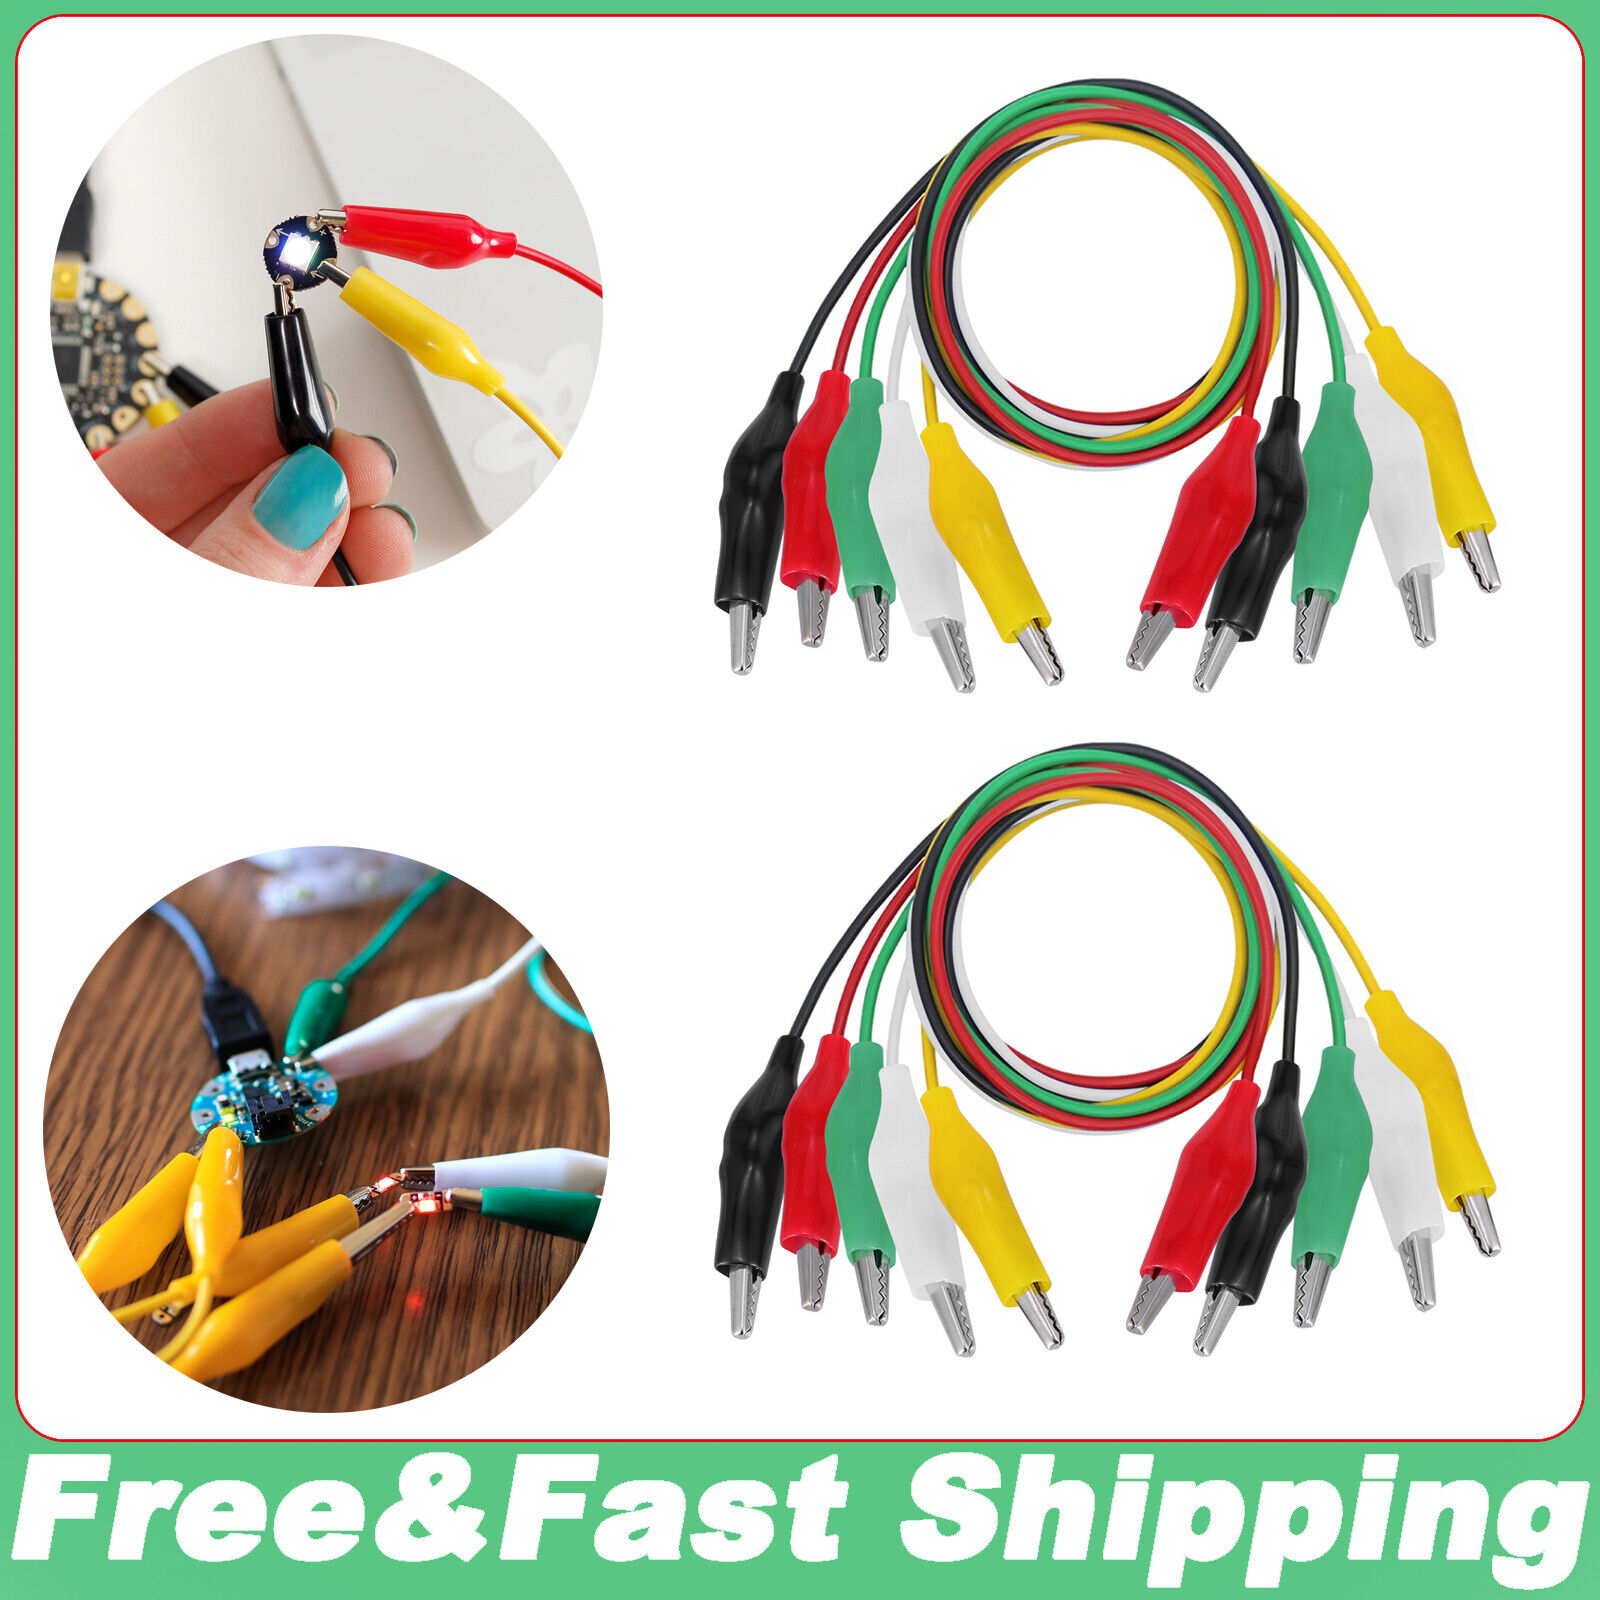 Lot of Mutimeter LEAD and 5 Colors Test Lead Cable Set Crocodile Alligator Clips